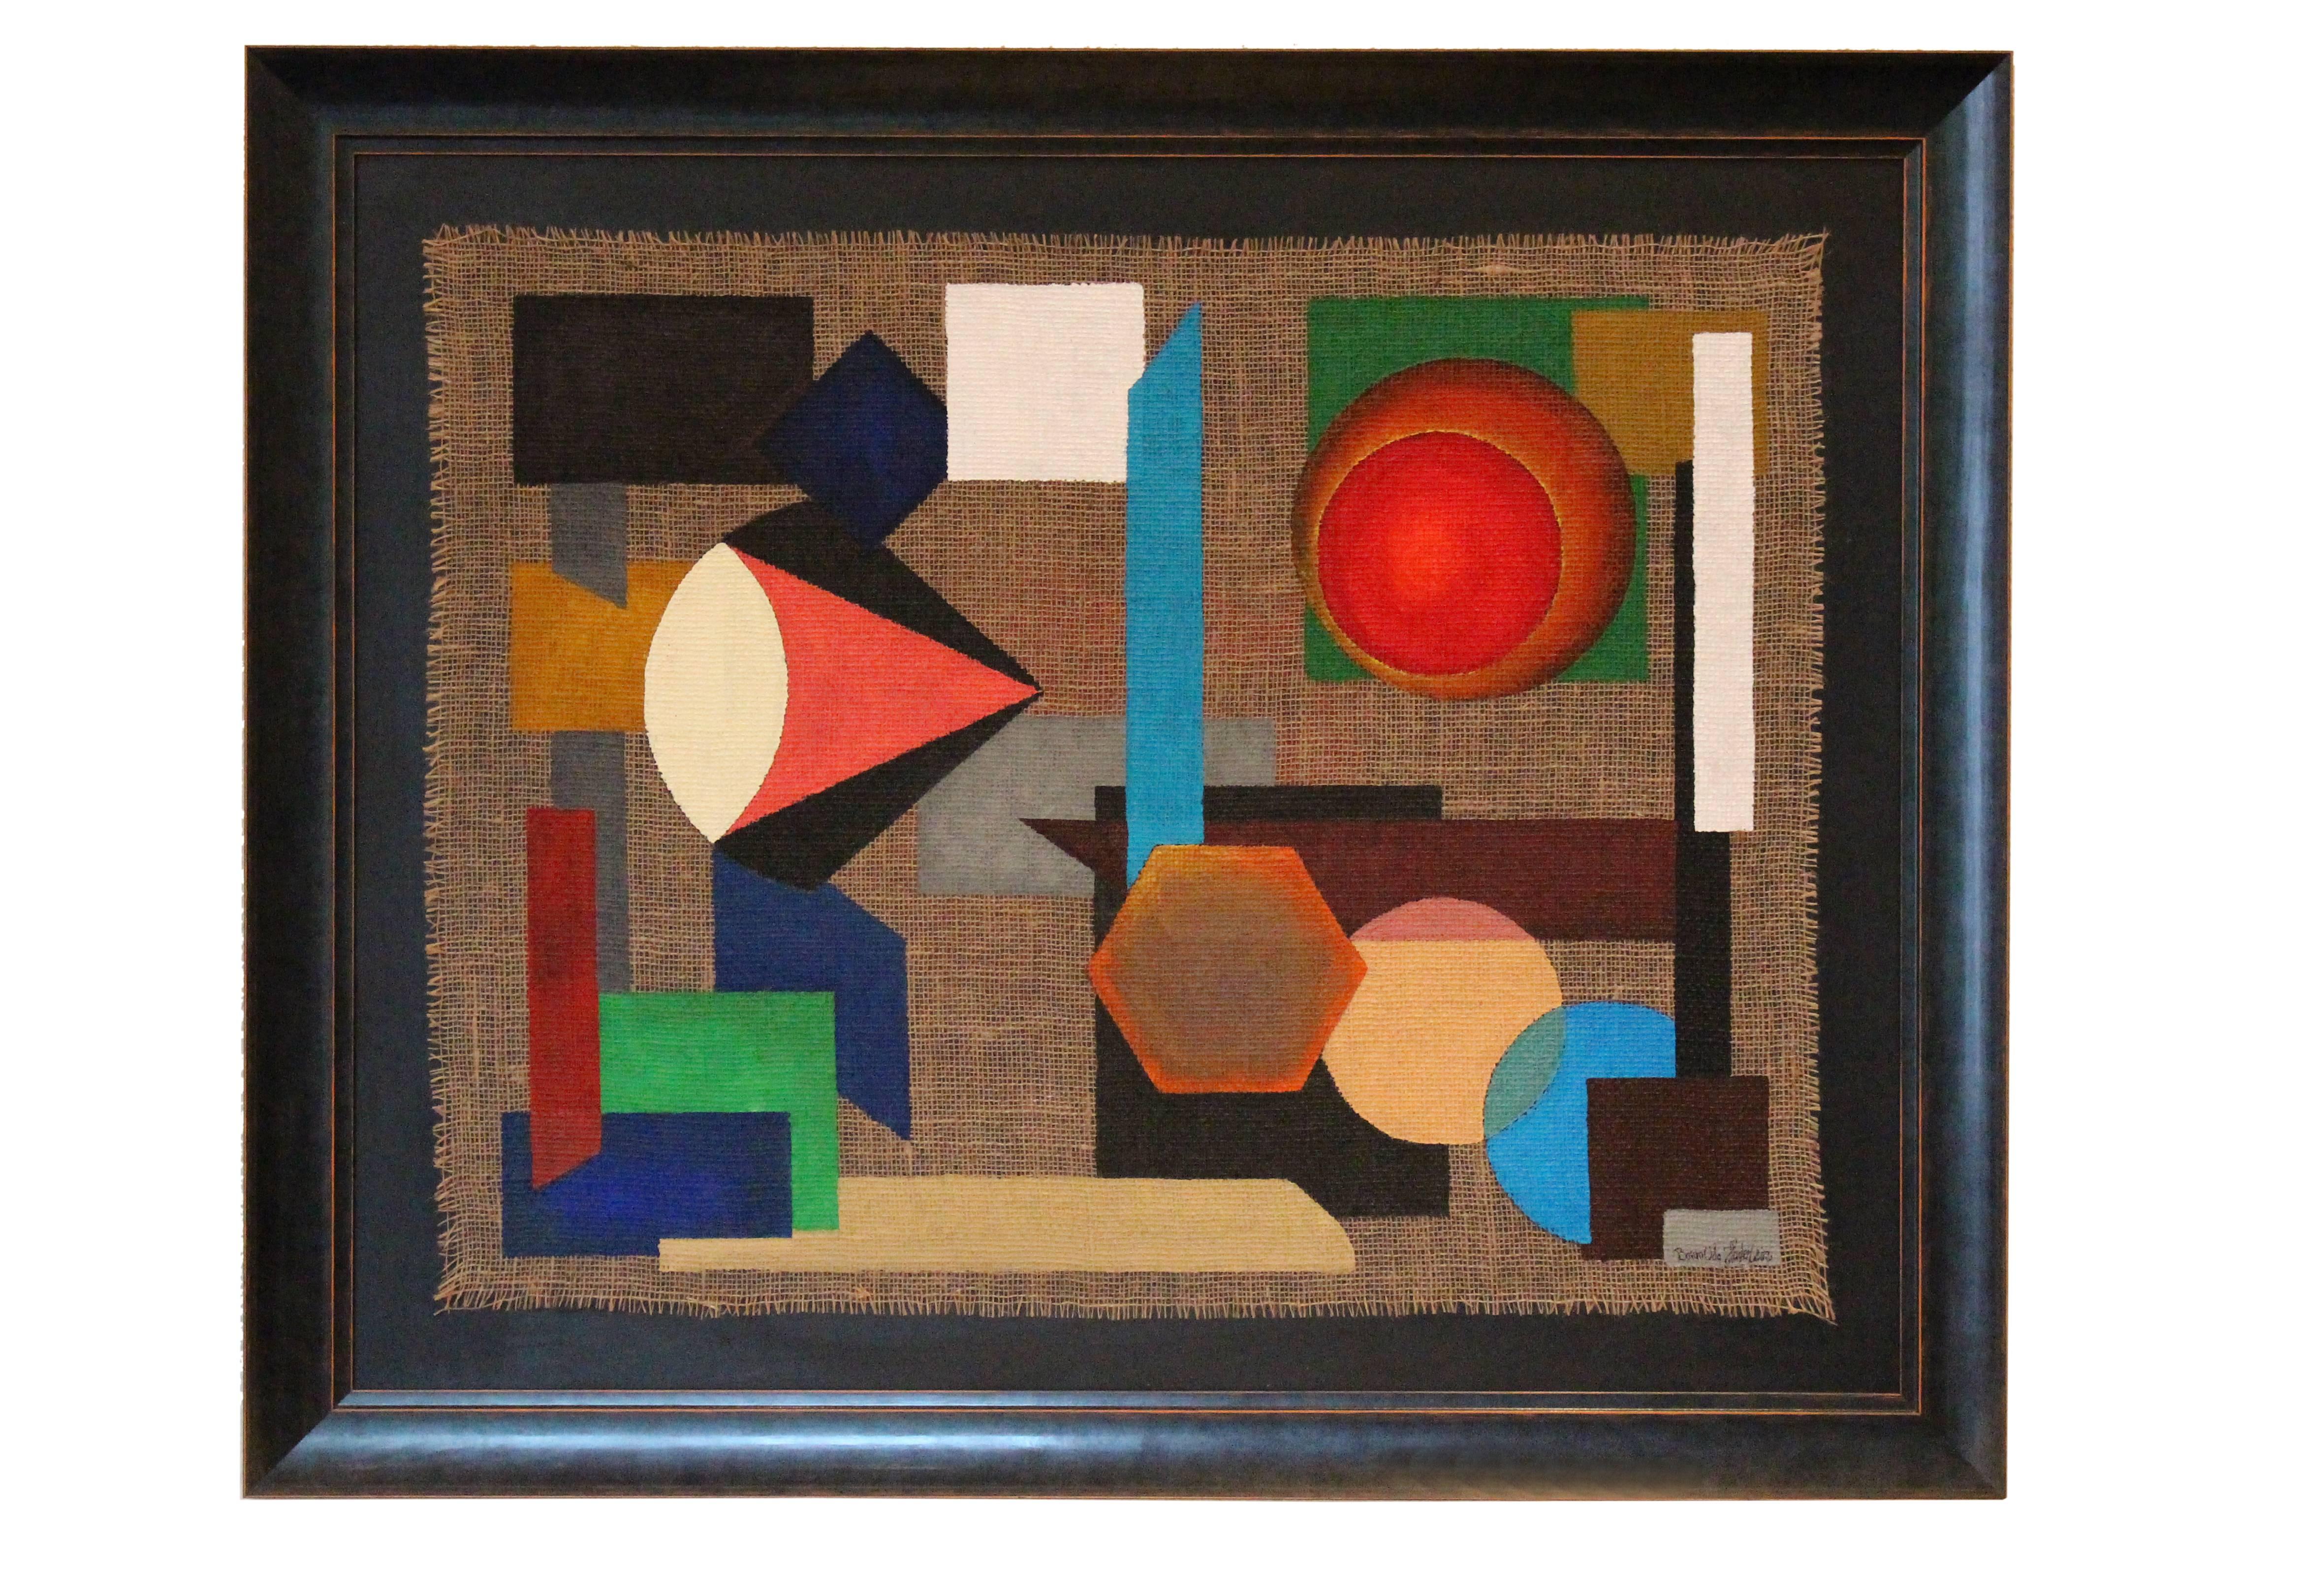 This is a very fine example of abstract art done on jute with acrylic paint. Dated and titled verso: Colors of Life 04/2014. Signed lower right: Baran Udo Haderlein 
Framed. Dimensions are: 27.17 x 35.04 in ( 69 x 89 cm ). It comes directly from the